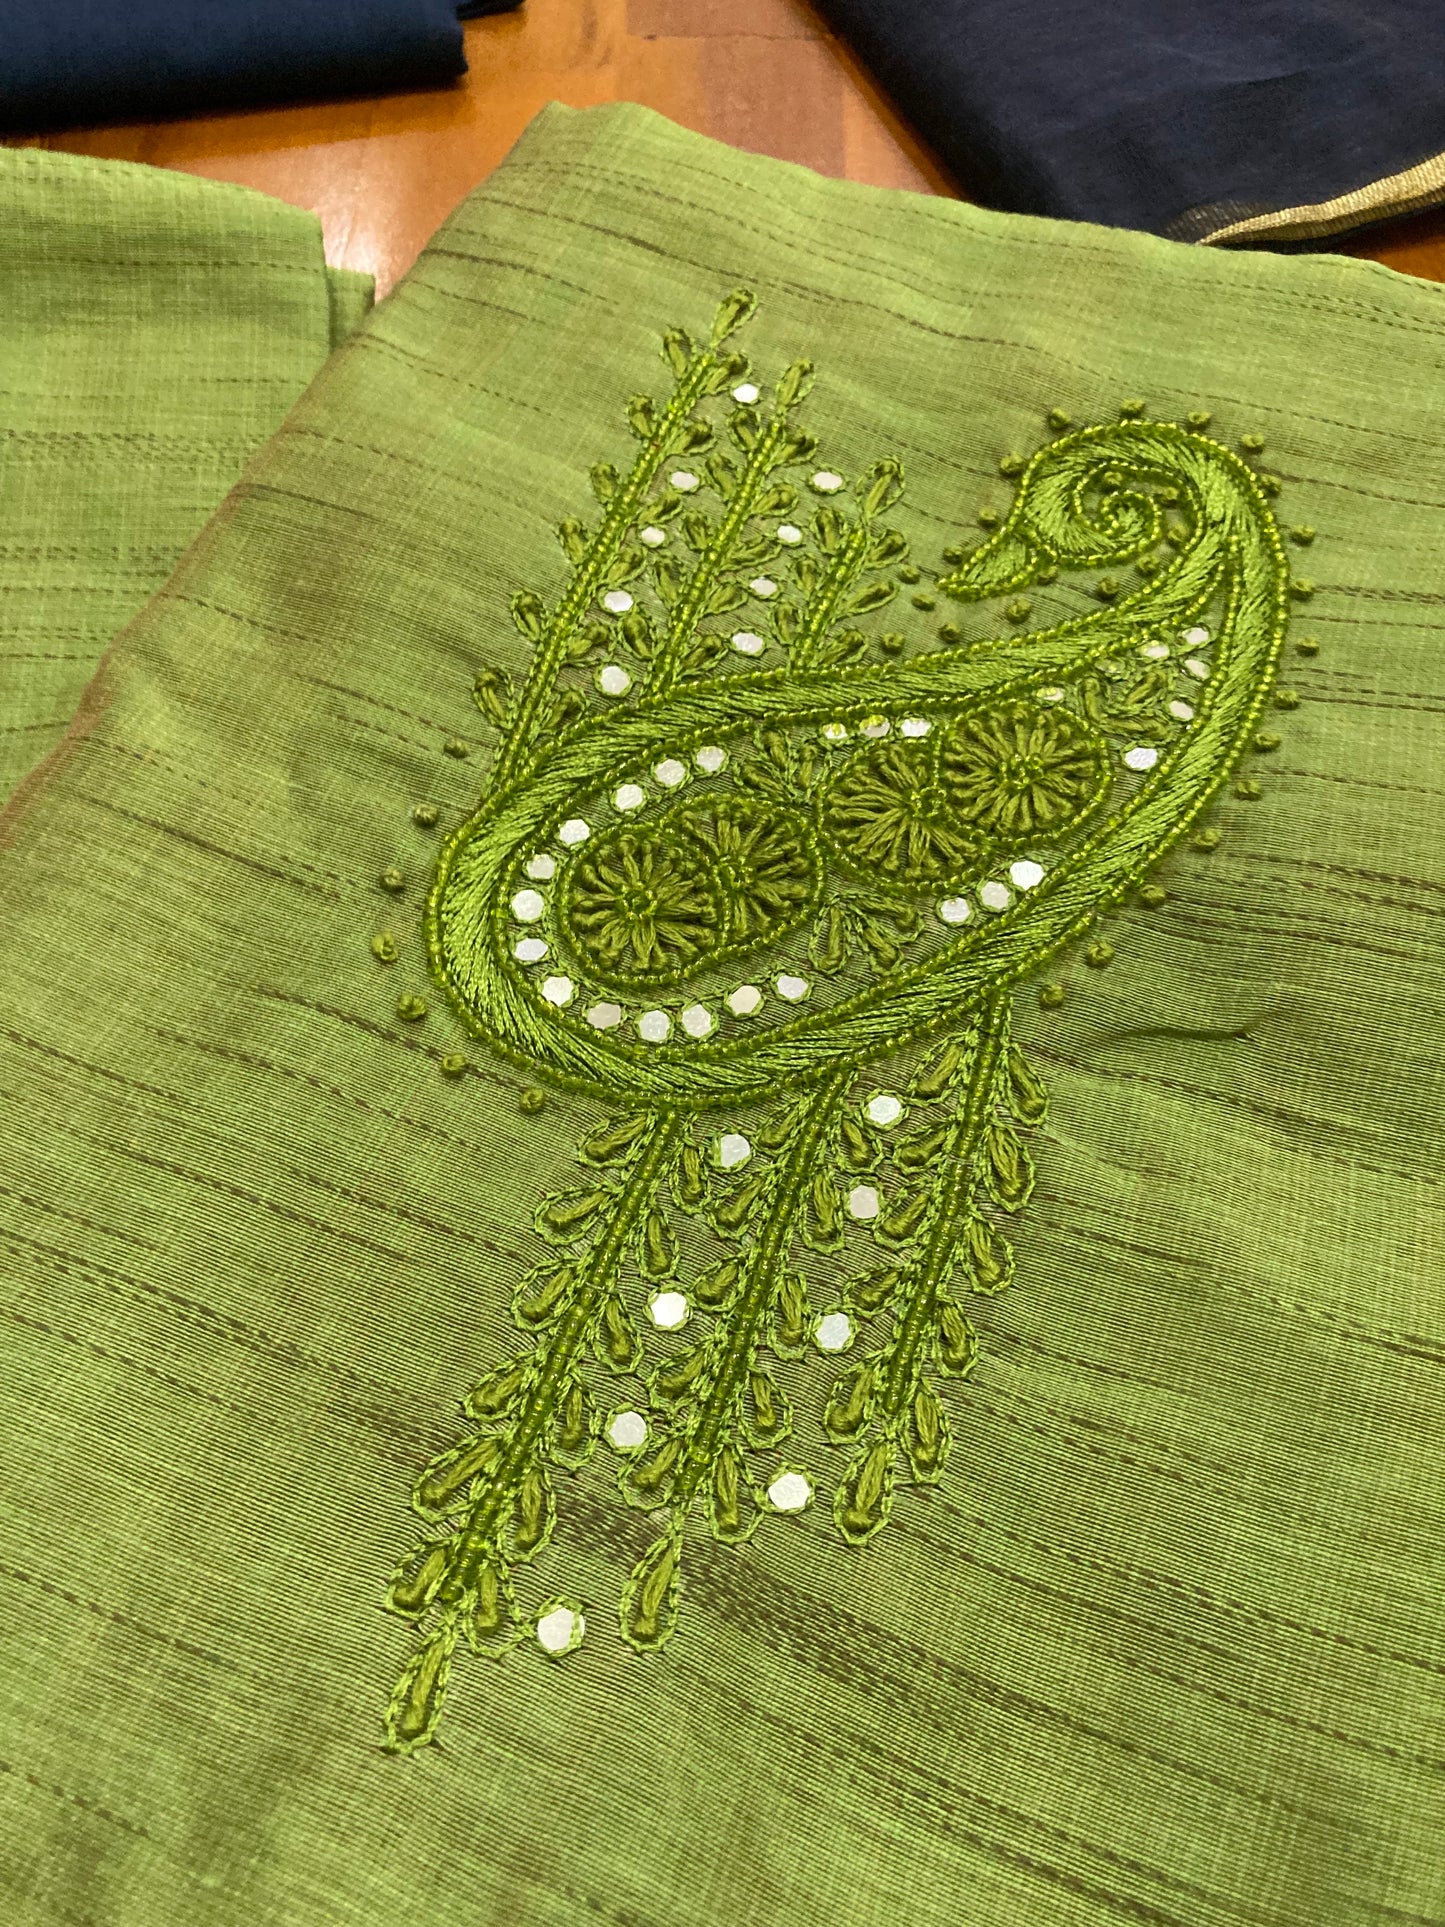 Southloom™ Semi Jute Churidar Salwar Suit Material in Green with Thread and Mirror work in Yoke Portion